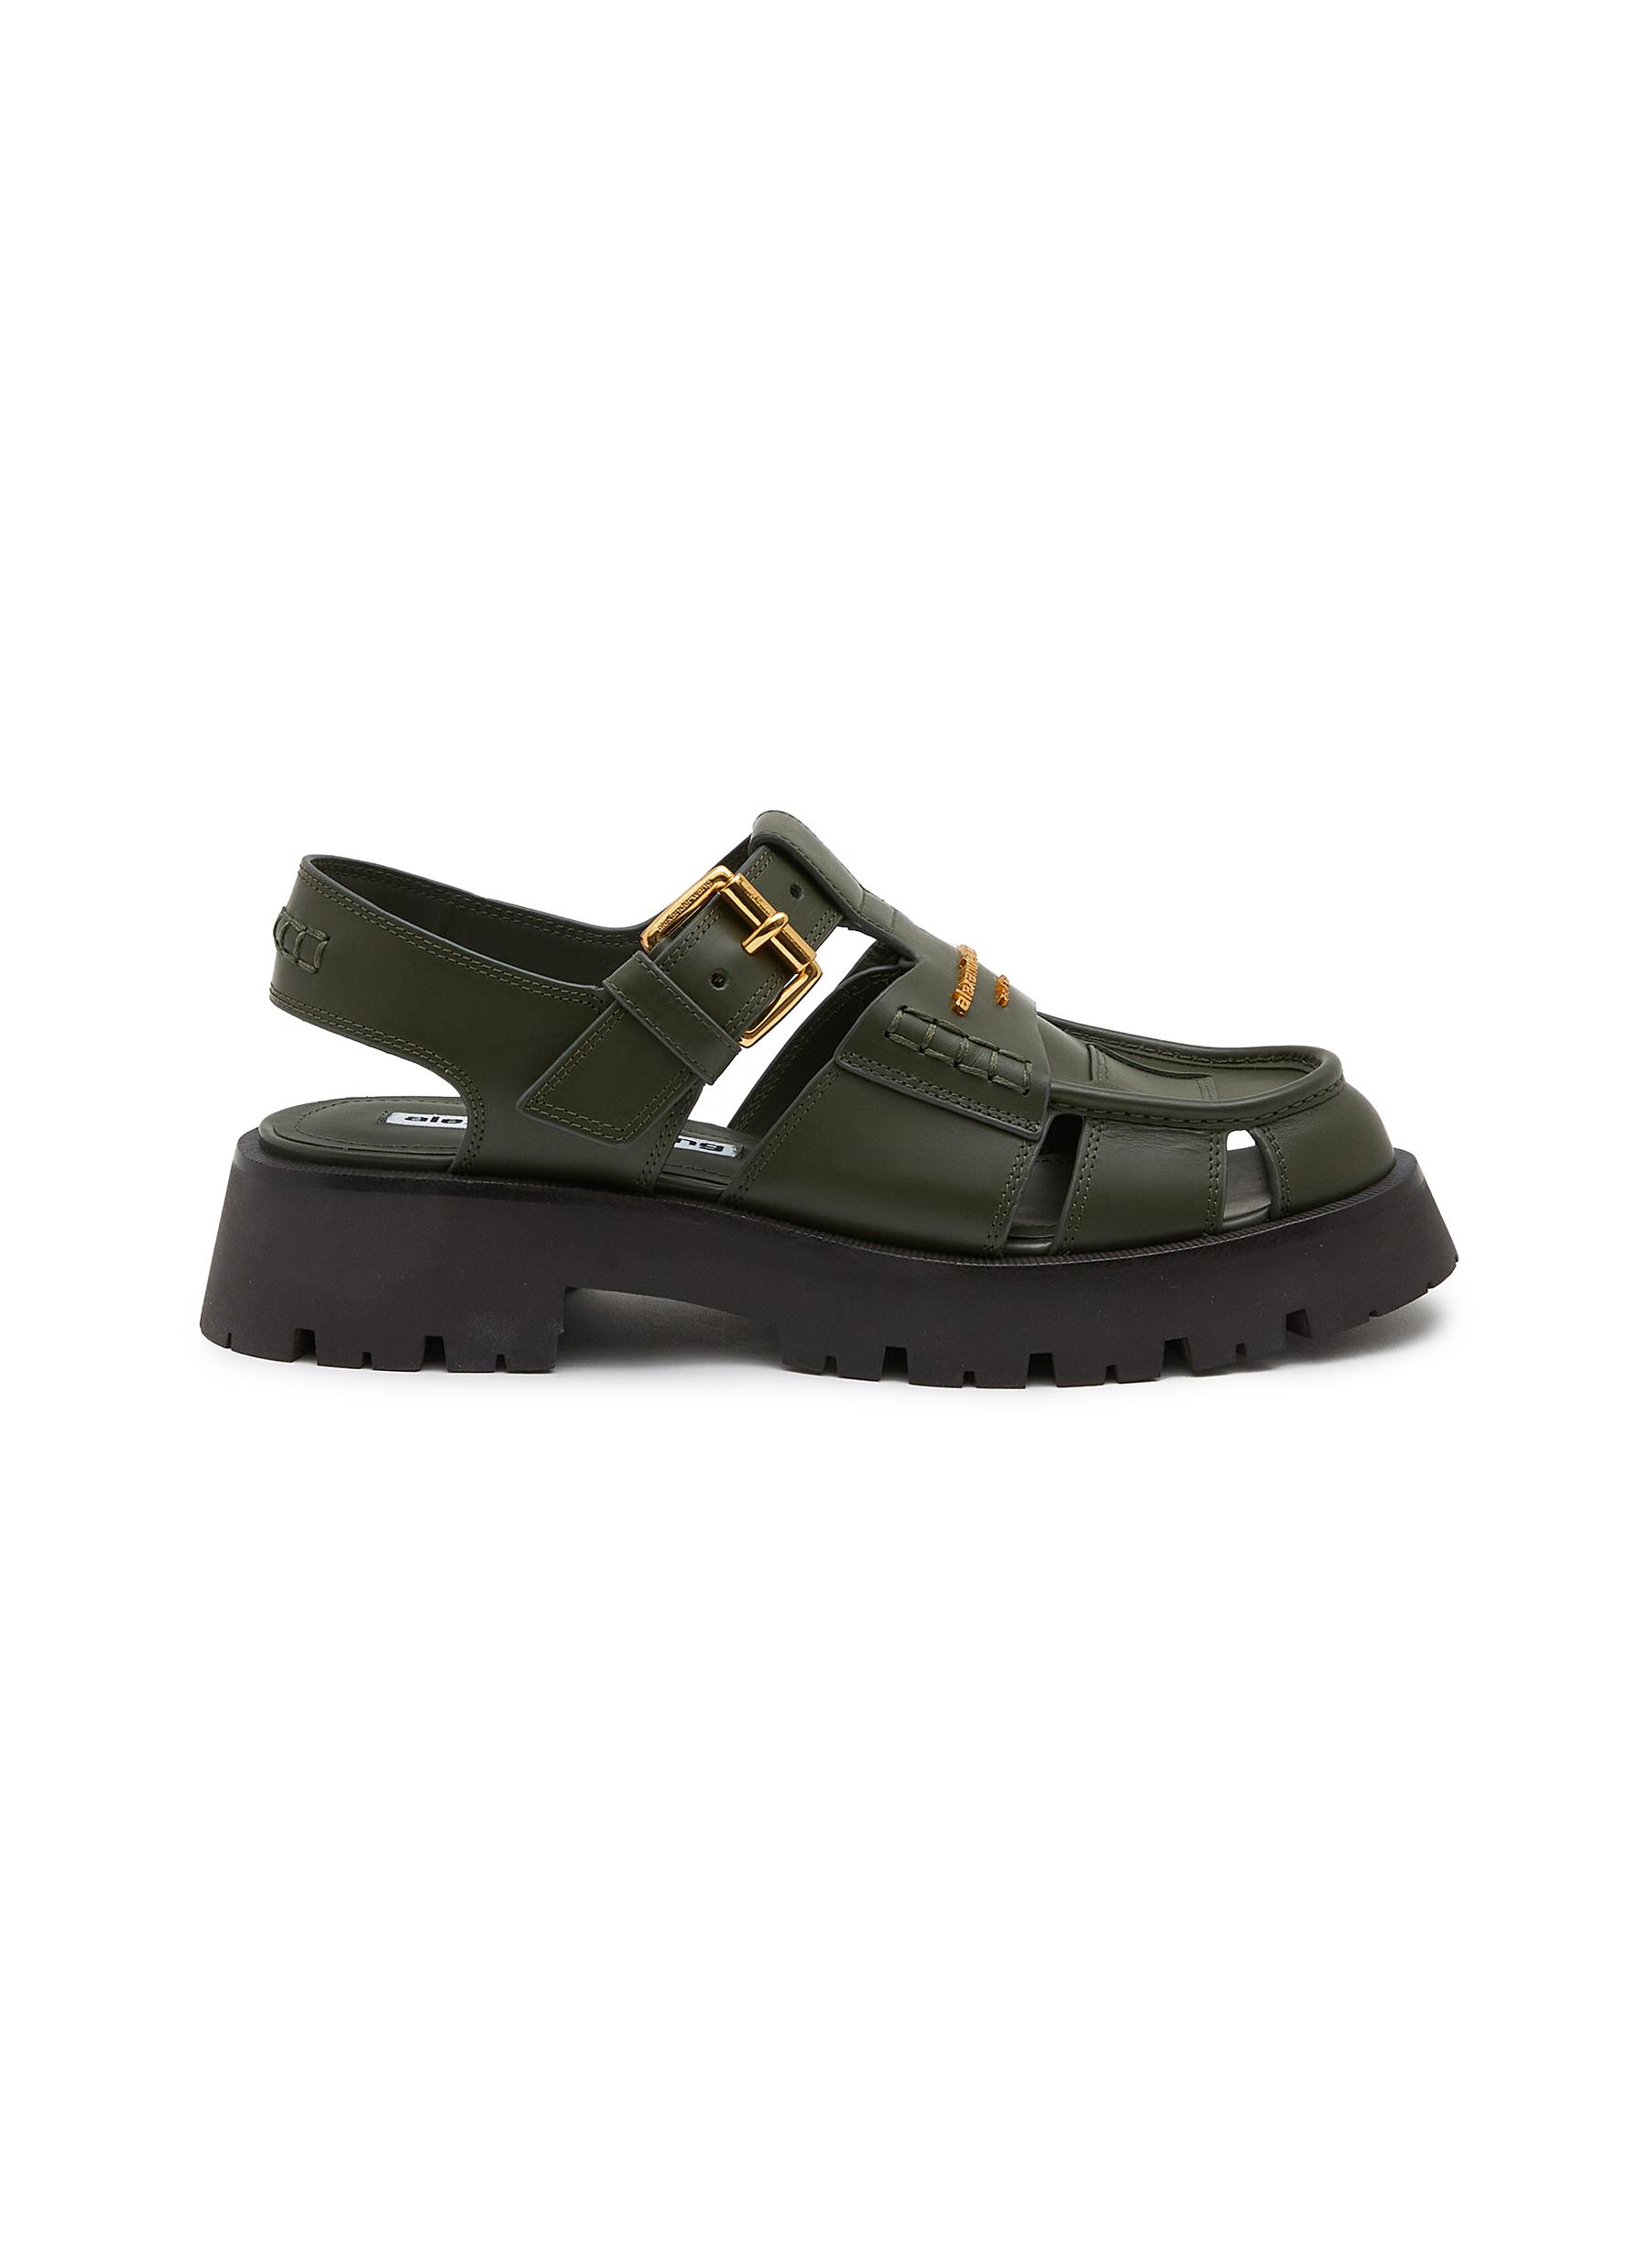 Carter Cage Leather Sandals